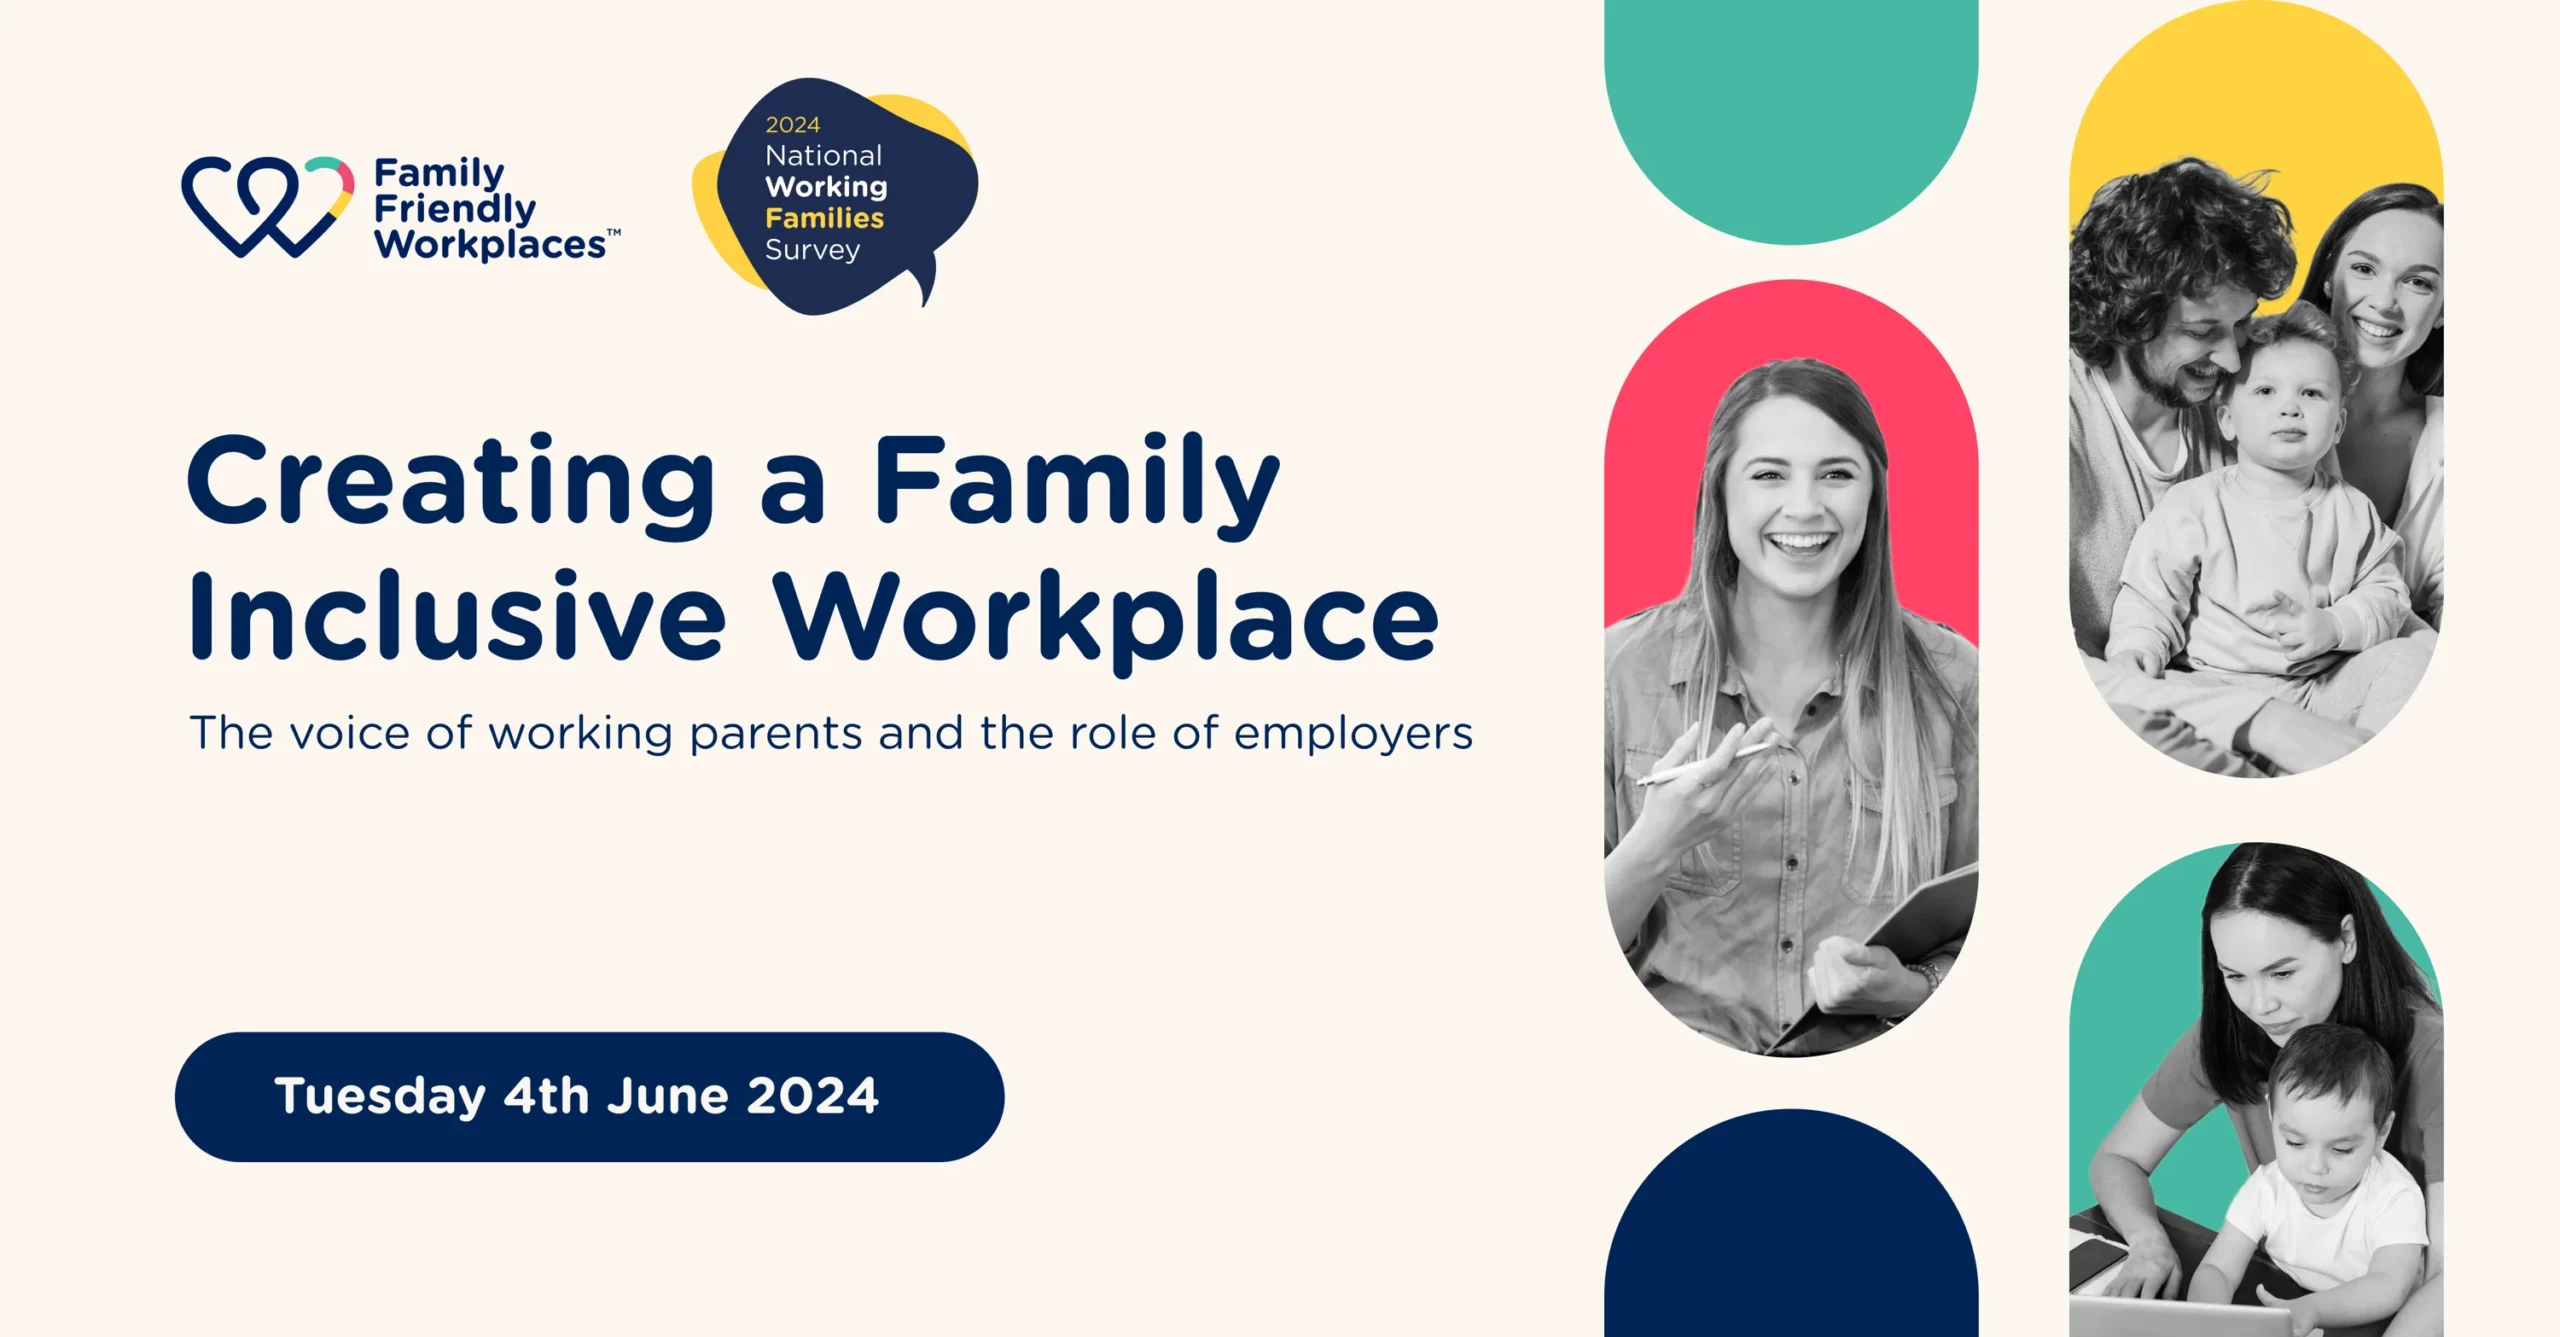 Creating a Family Inclusive Workplace Event 4th June 2024 Register Now